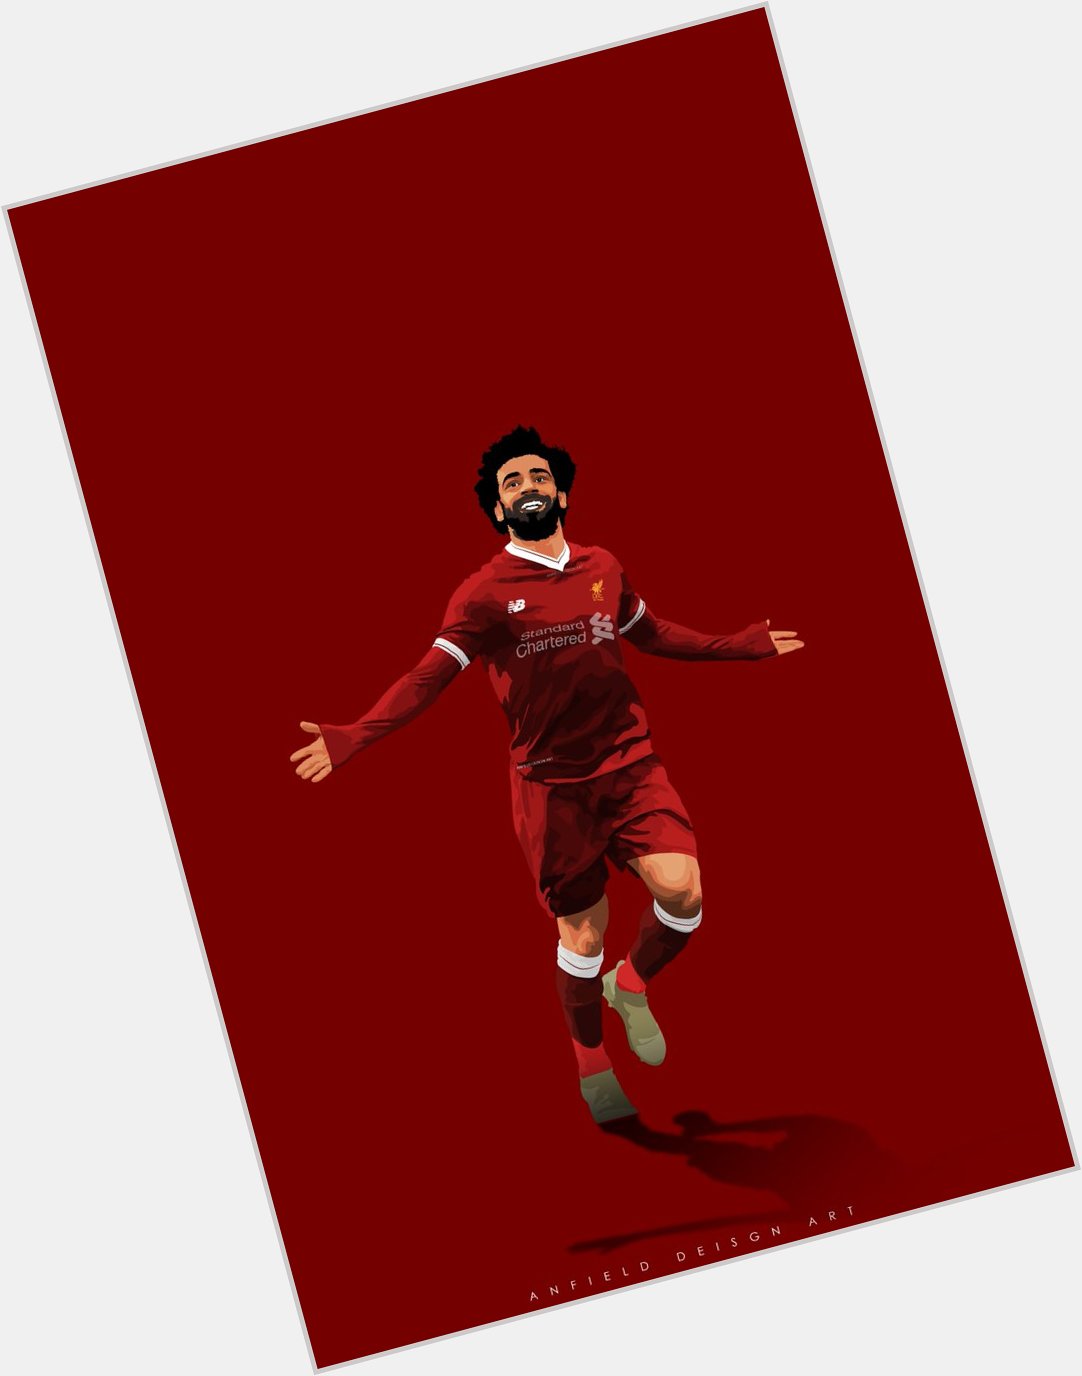 Happy birthday mohamed salah 
wish to see you in liverpool shirt forever and ever. 